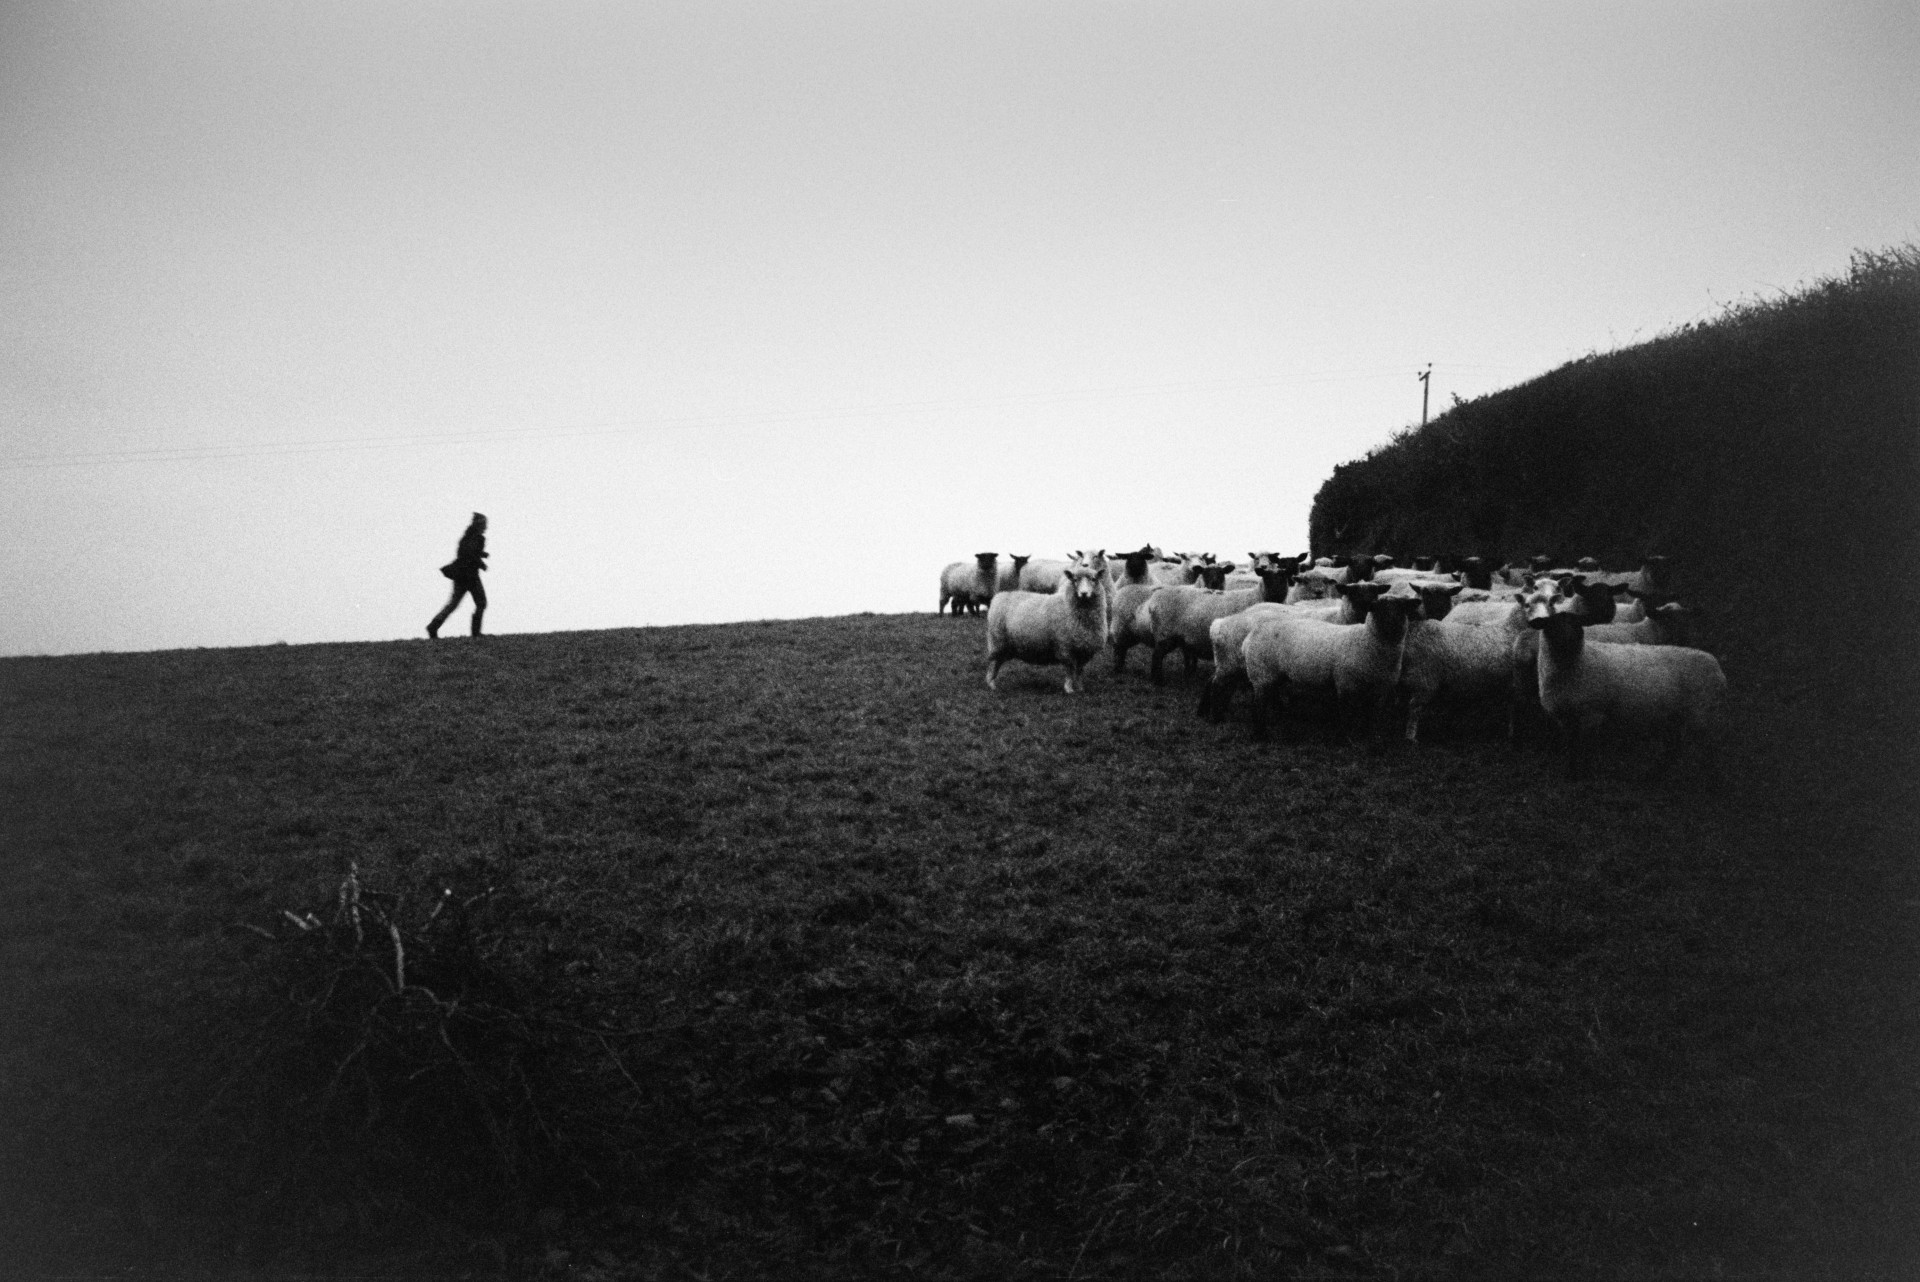 Derek Bright herding sheep in a field at Mill Road Farm, Beaford. He is silhouetted on the horizon. The farm was also known as Jeffrys.